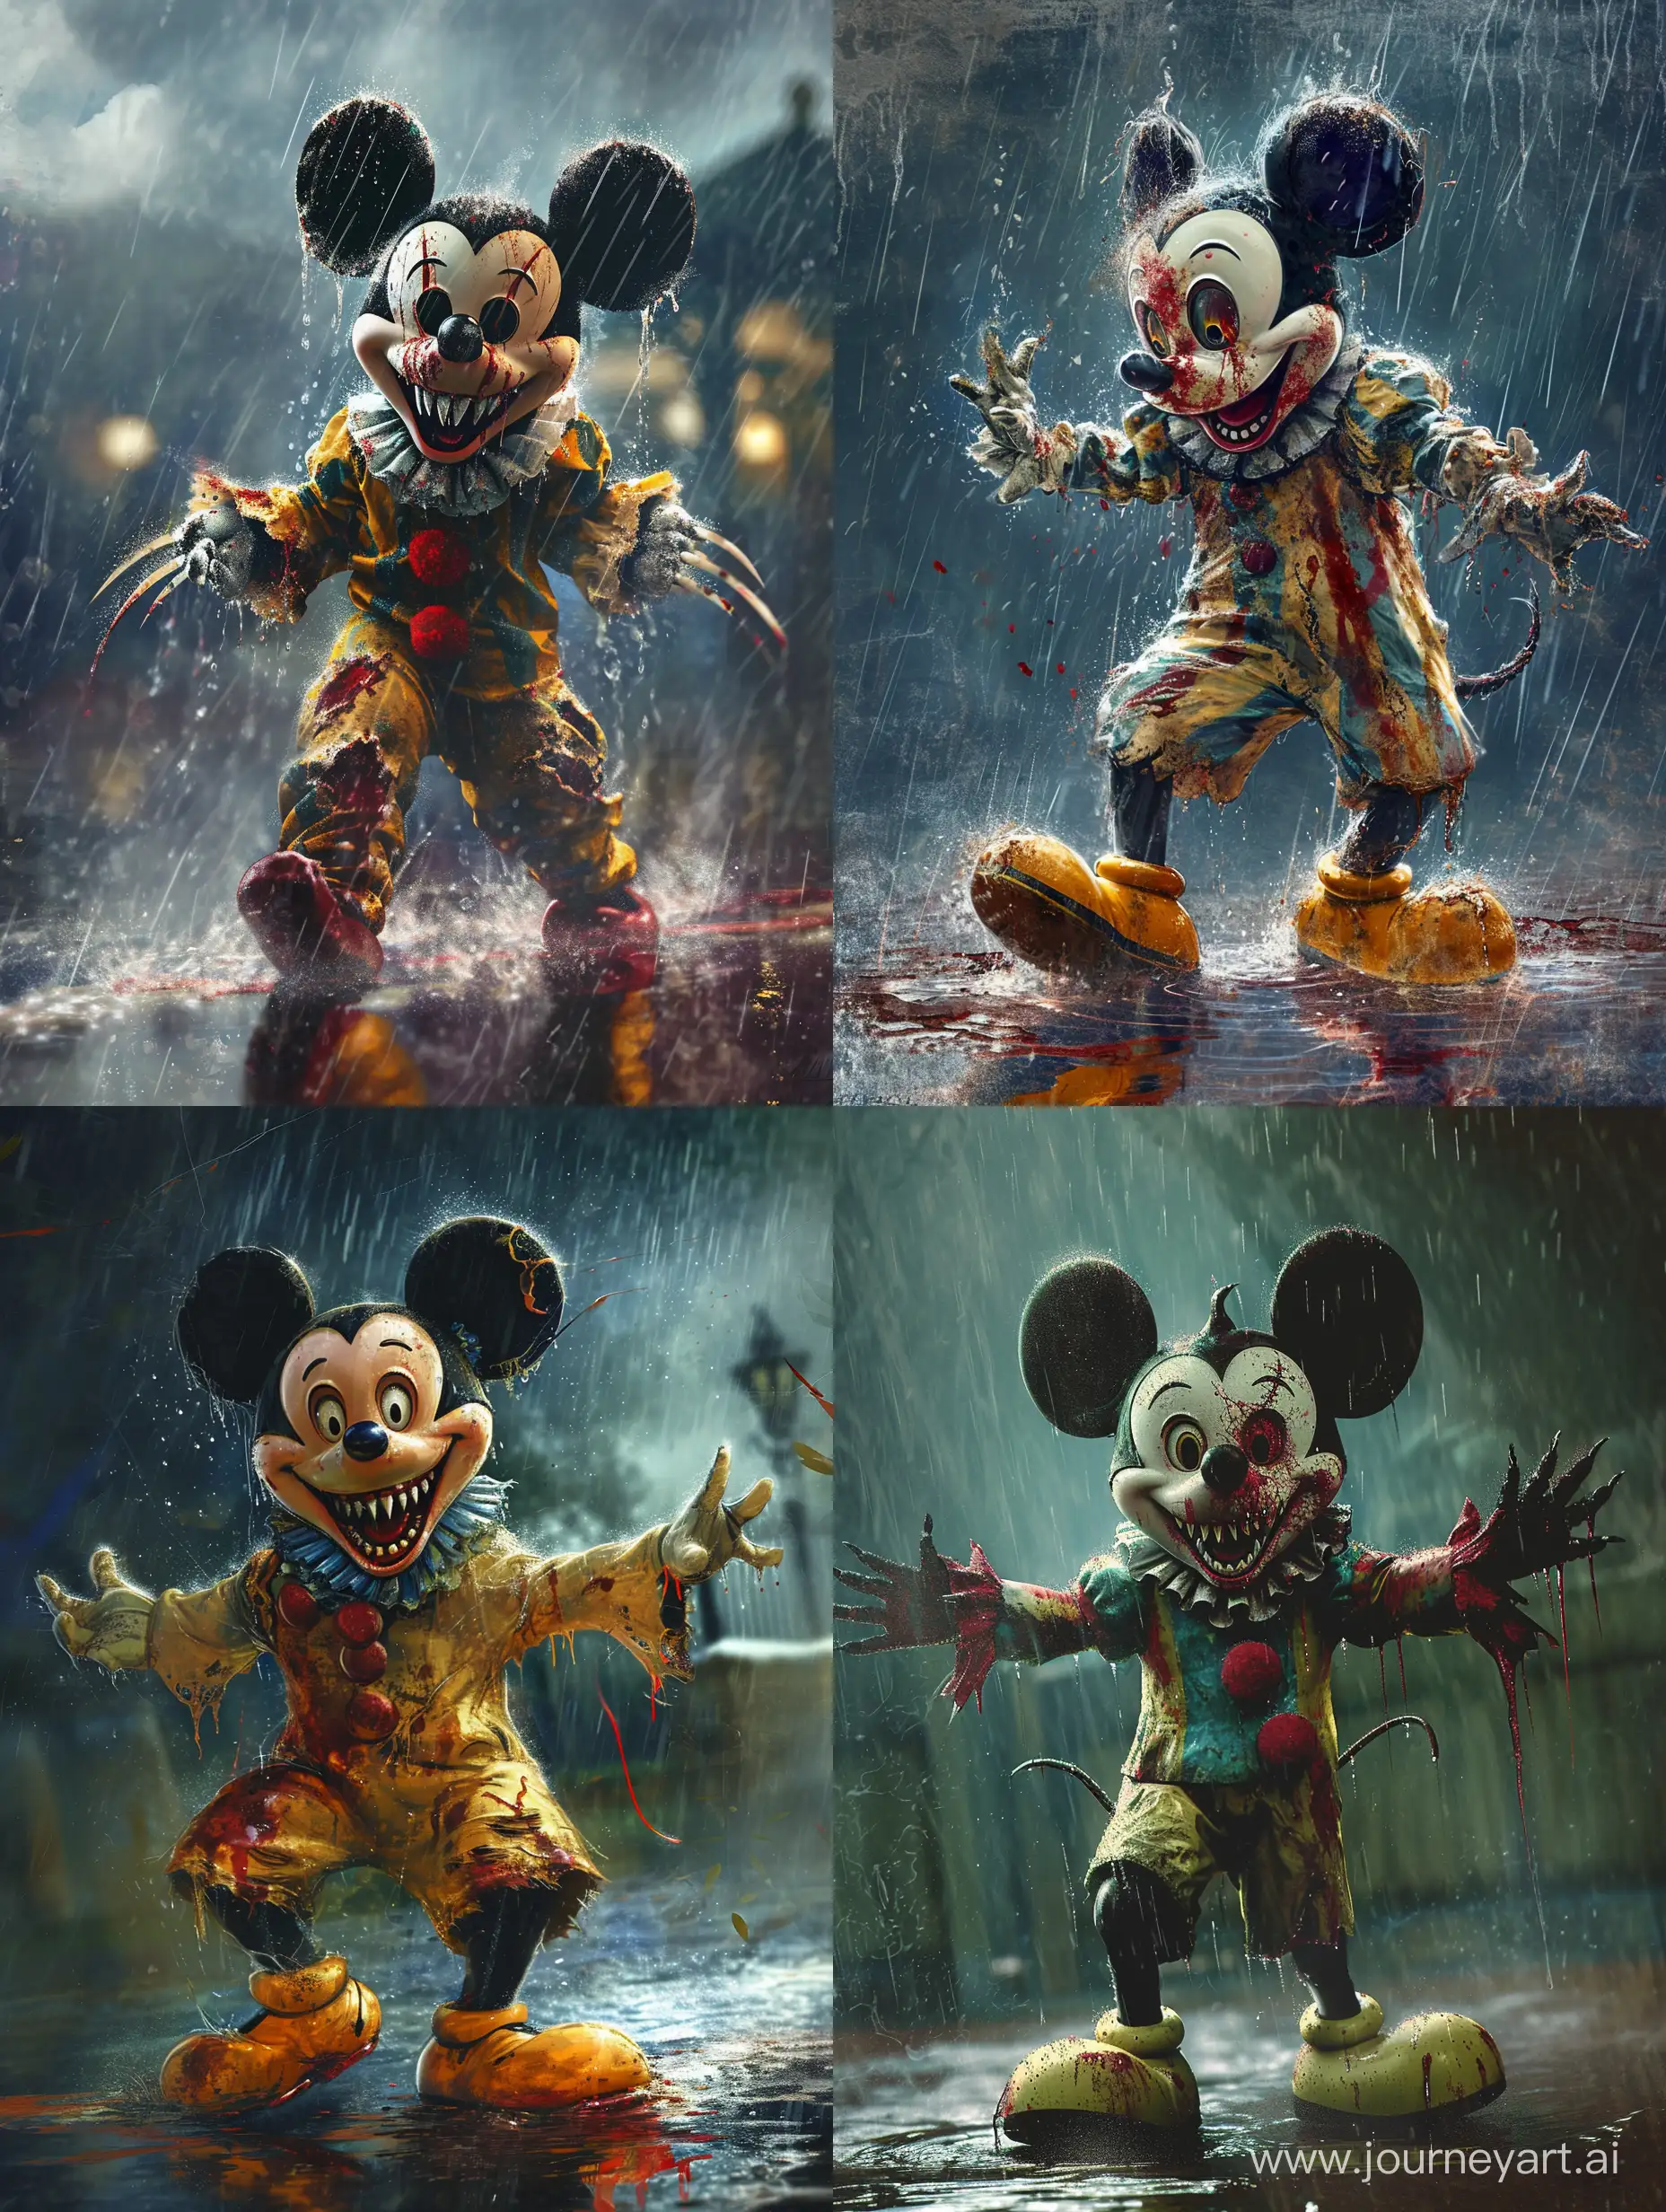 Evil-Clown-Mickey-Mouse-Dancing-in-Bloodstained-Rain